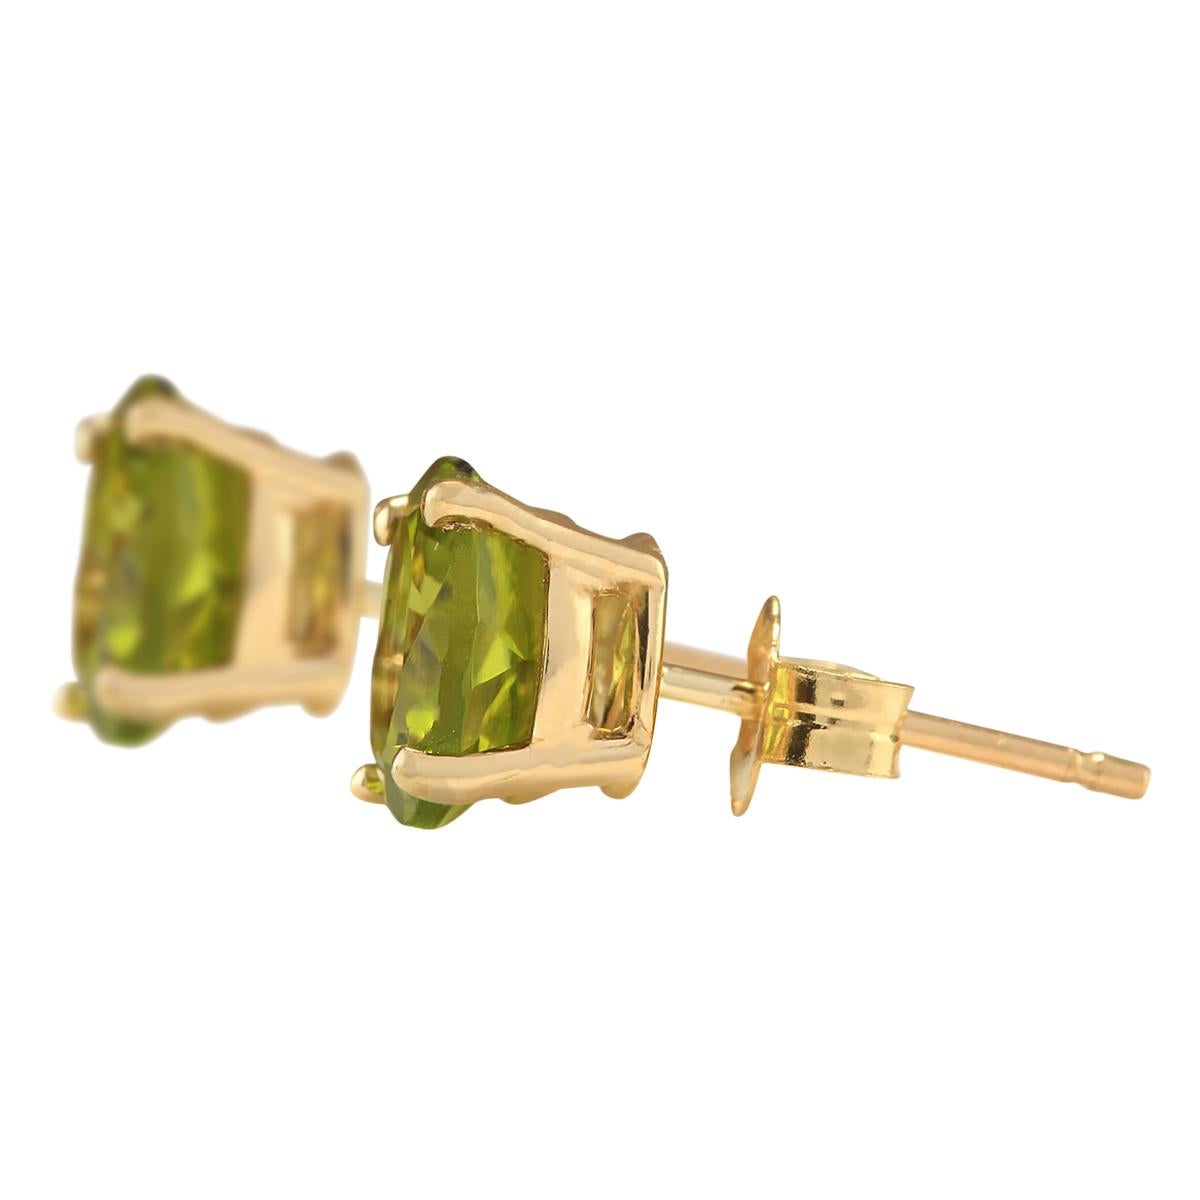 Stamped: 14K Yellow Gold
Total Earrings Weight: 1.2 Grams
Total Natural Peridot Weight is 3.00 Carat
Color: Green
Face Measures: 7.00x7.00 mm
Sku: [703322W]